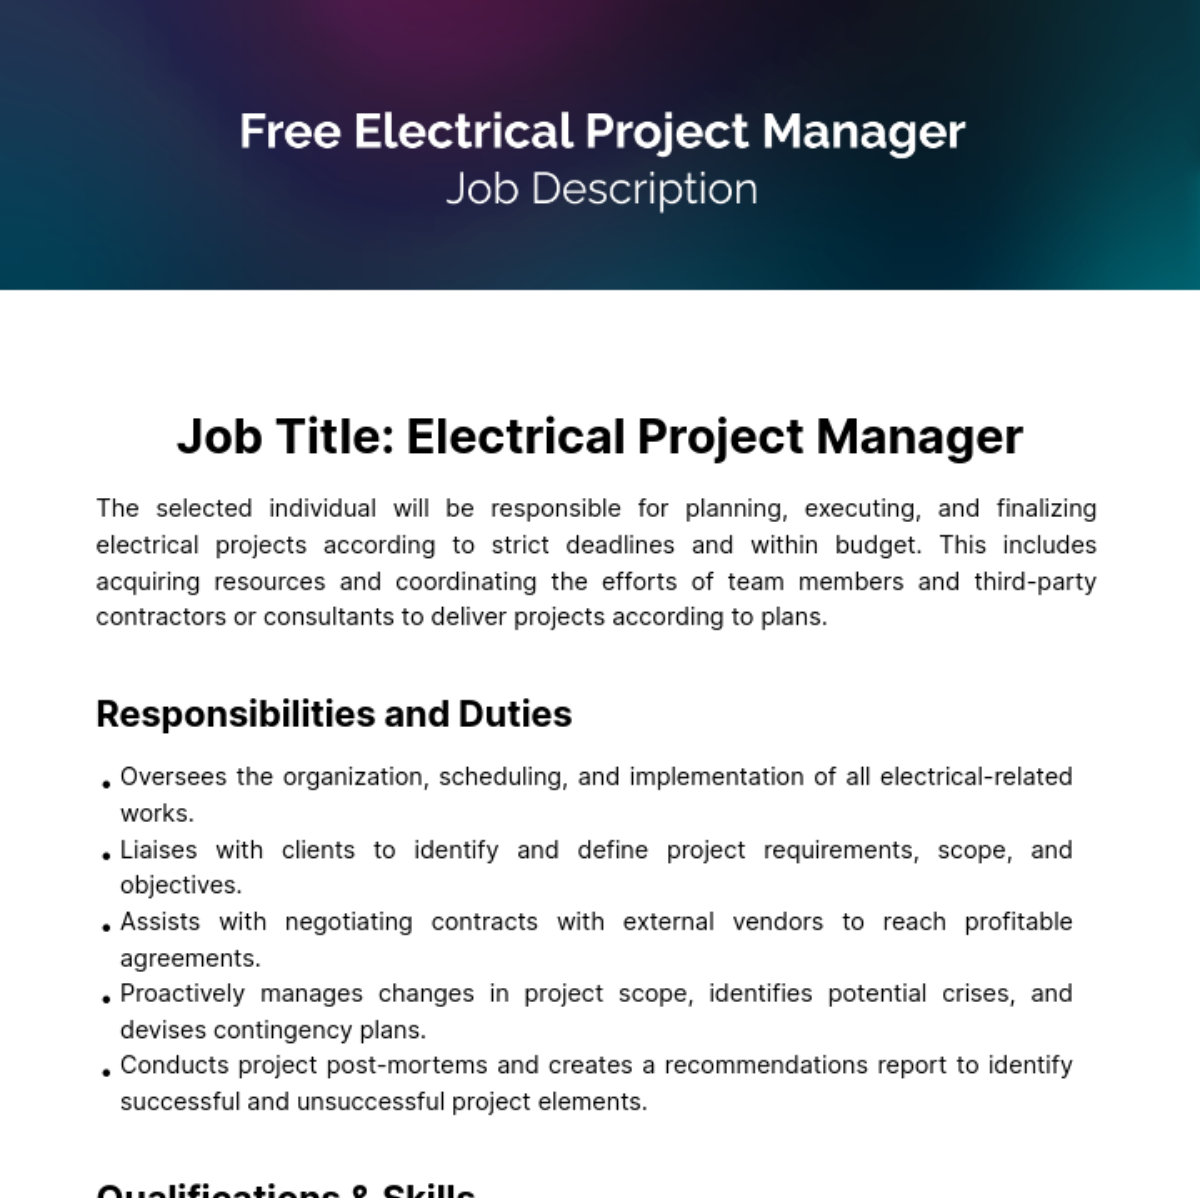 Free Electrical Project Manager Job Description Template